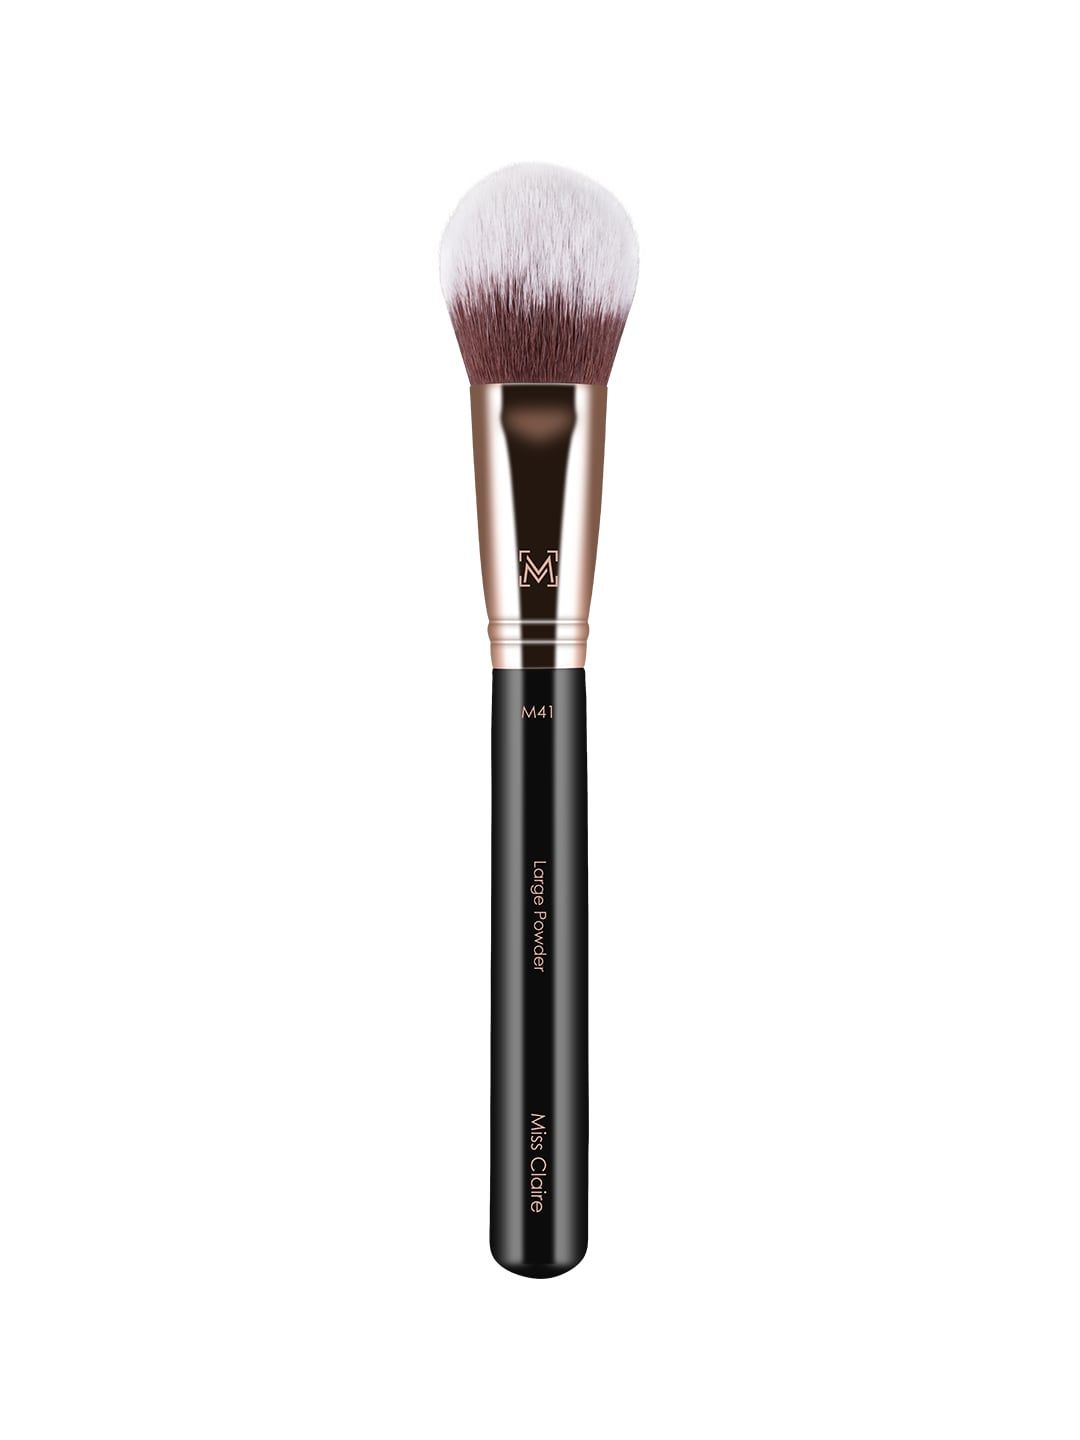 Miss Claire Large Powder Brush - M41 Black & Rose Gold-Toned Price in India